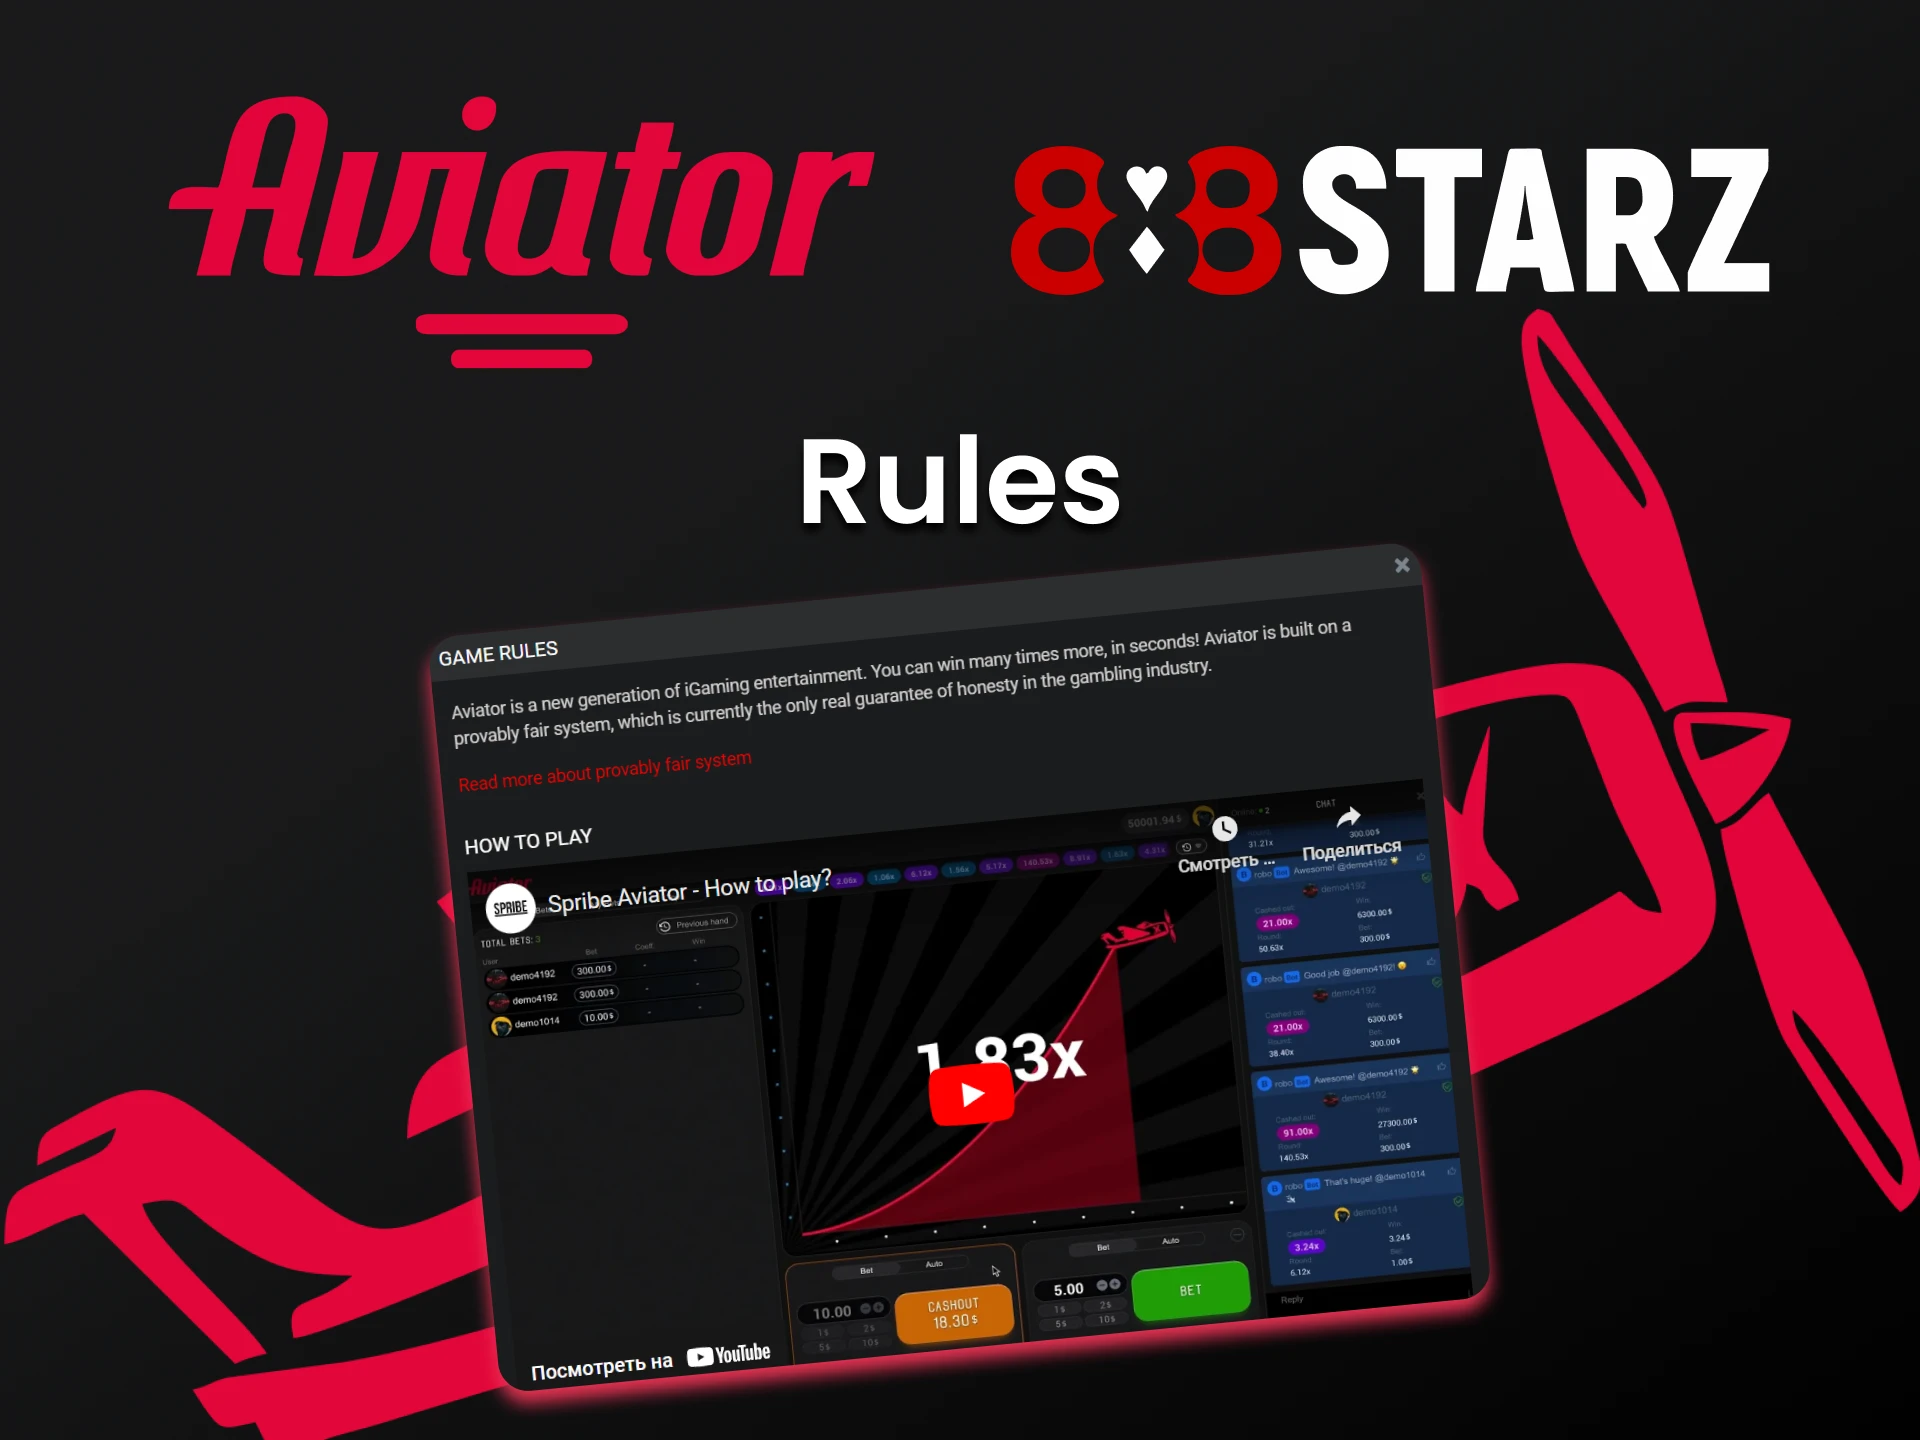 Find out what rules there are in the game Aviator.